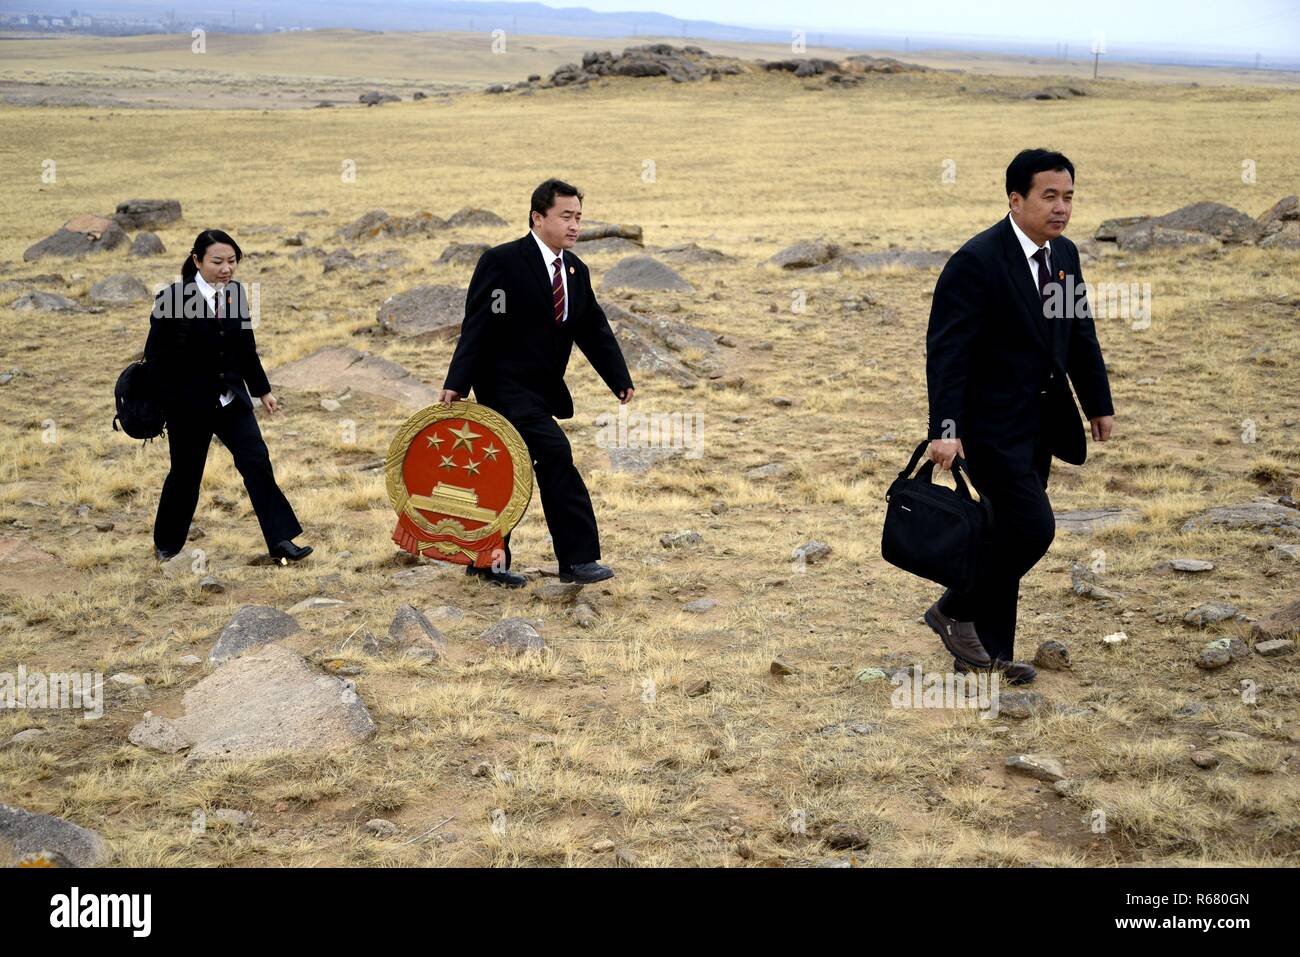 (181204) -- BEIJING, Dec. 4, 2018 (Xinhua) -- Ren Xiuyong (1st R), a judge of the assize court in Urad Middle Banner pasture, walks with colleagues to offer legal aids for local people in north China's Inner Mongolia Autonomous Region, Oct. 30, 2014. Legal aid institutions across China have handled about 6.34 million cases during the past five years, helping 6.96 million people, the Ministry of Justice said Thursday. Over the past five years, legal aid institutions at all levels have helped 2.47 million migrant workers, 328,000 people with disabilities, 585,000 elderly people and 742, 0 Stock Photo